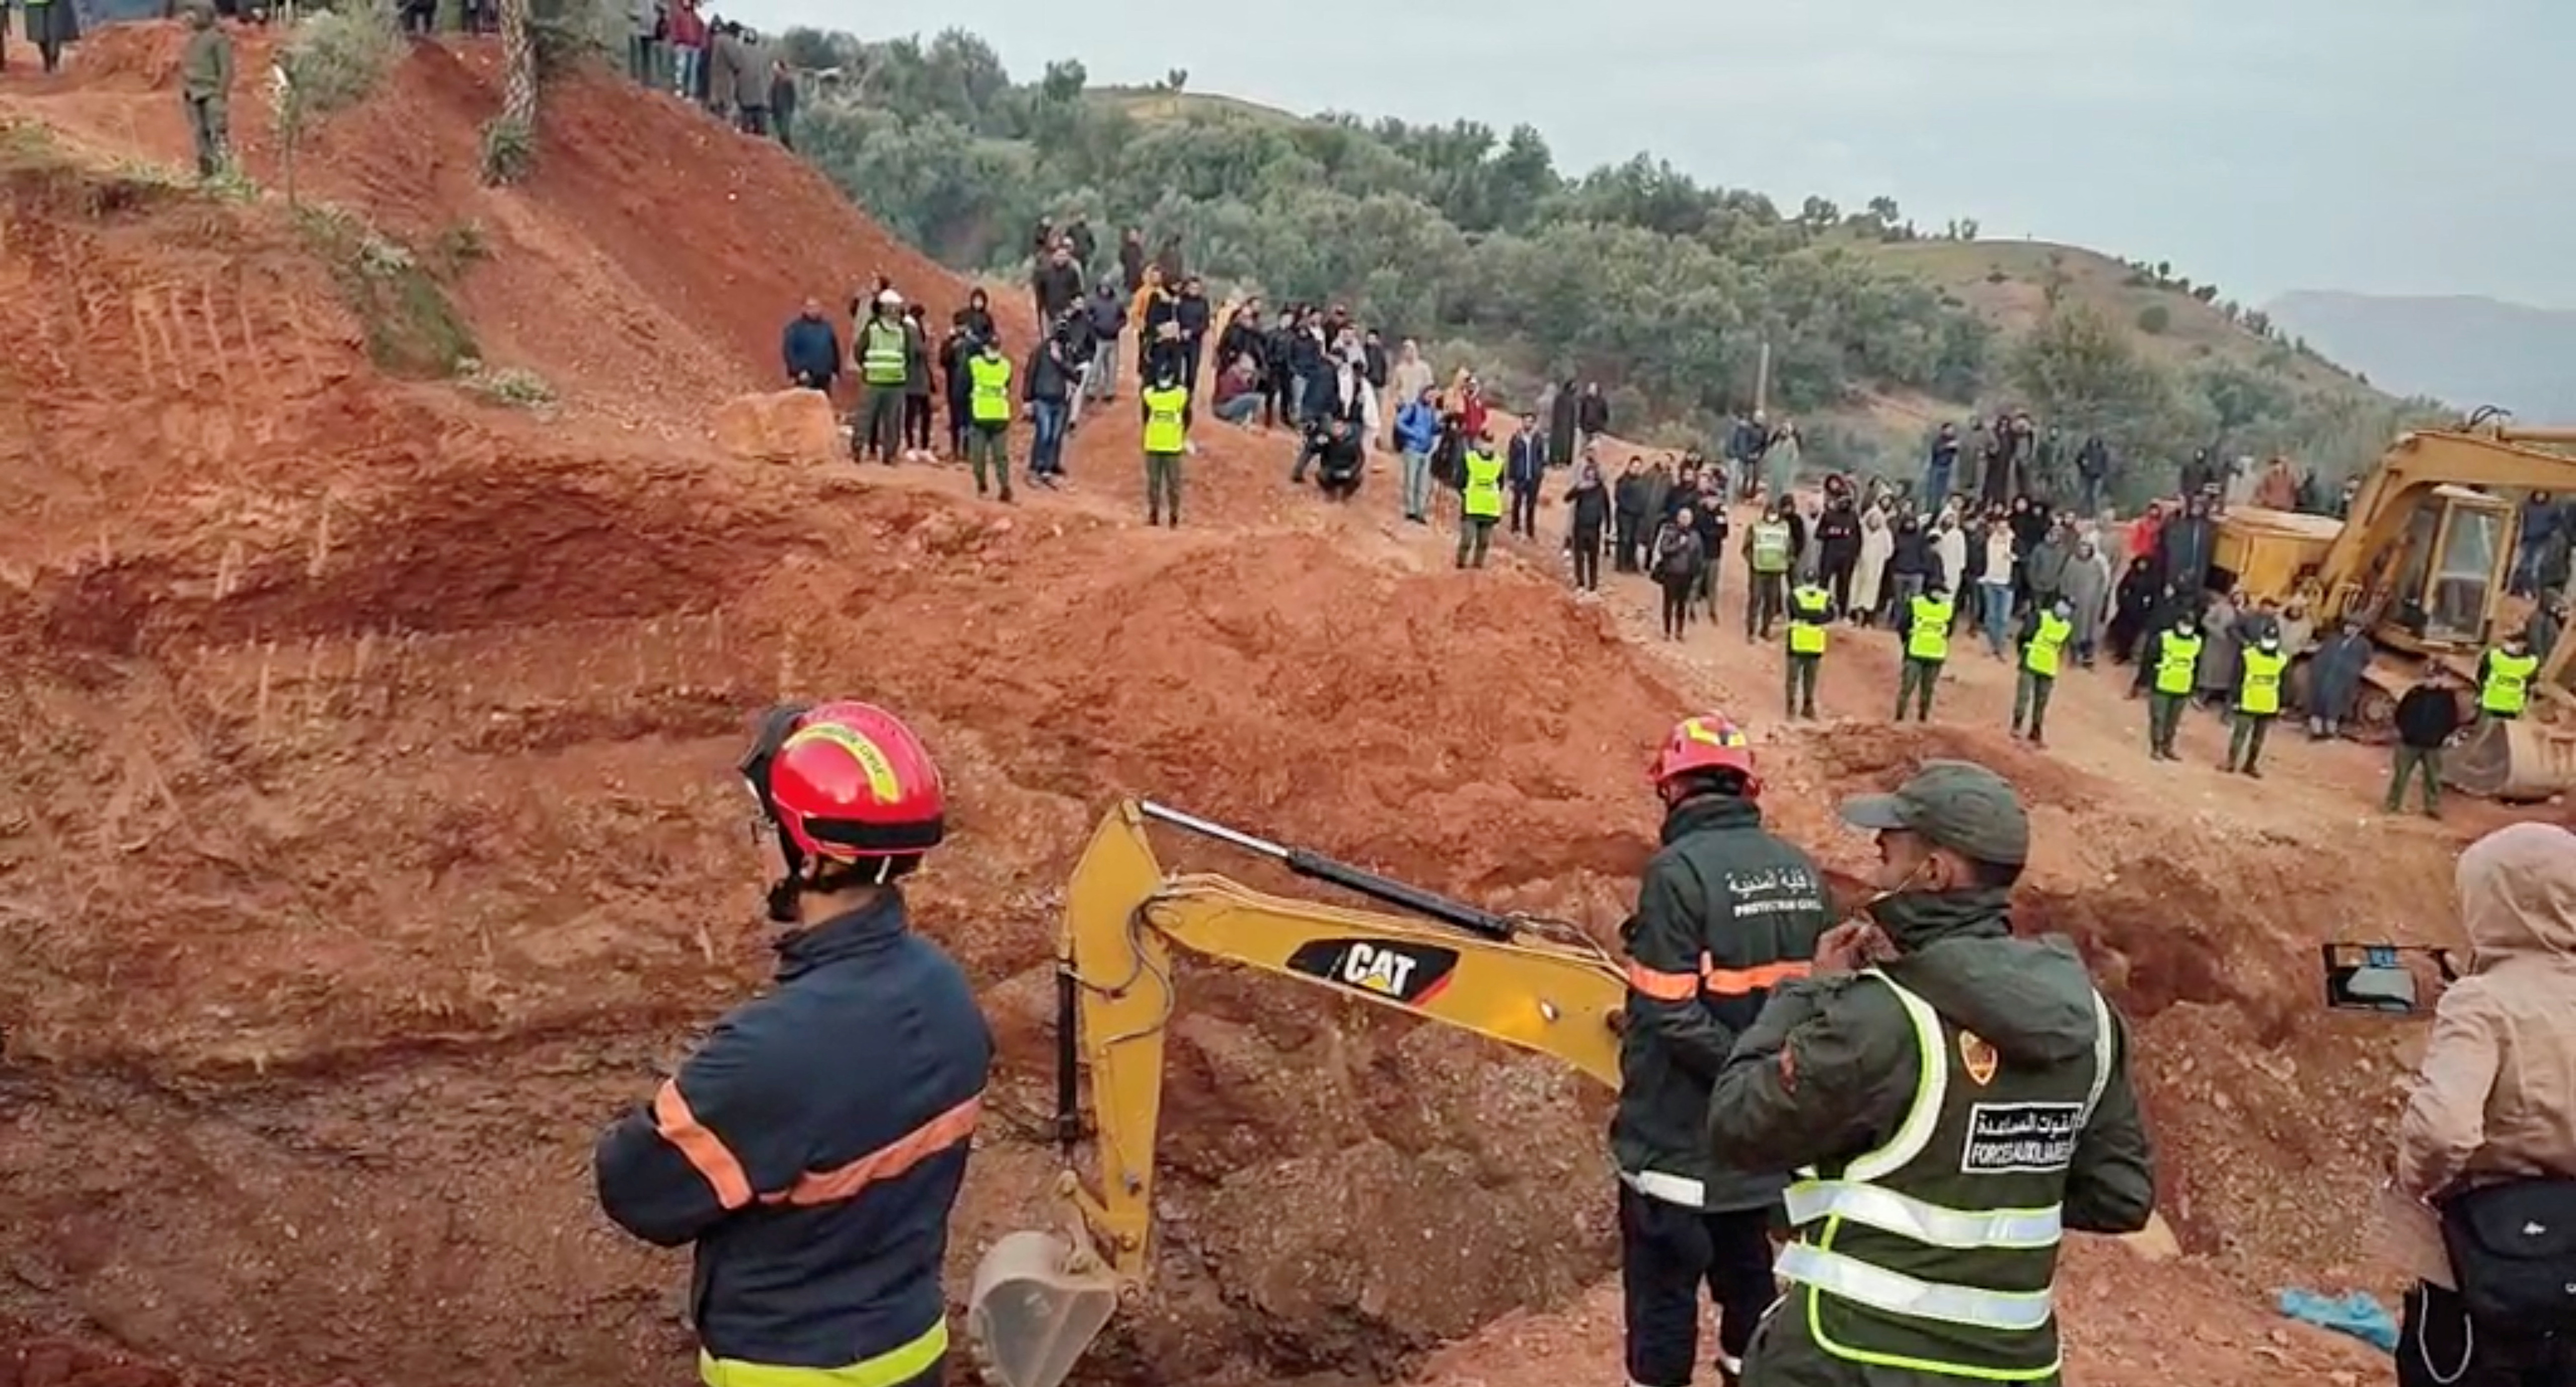 People use machinery to excavate the ground in order to free a boy trapped in an underground well, in Chefchaouen